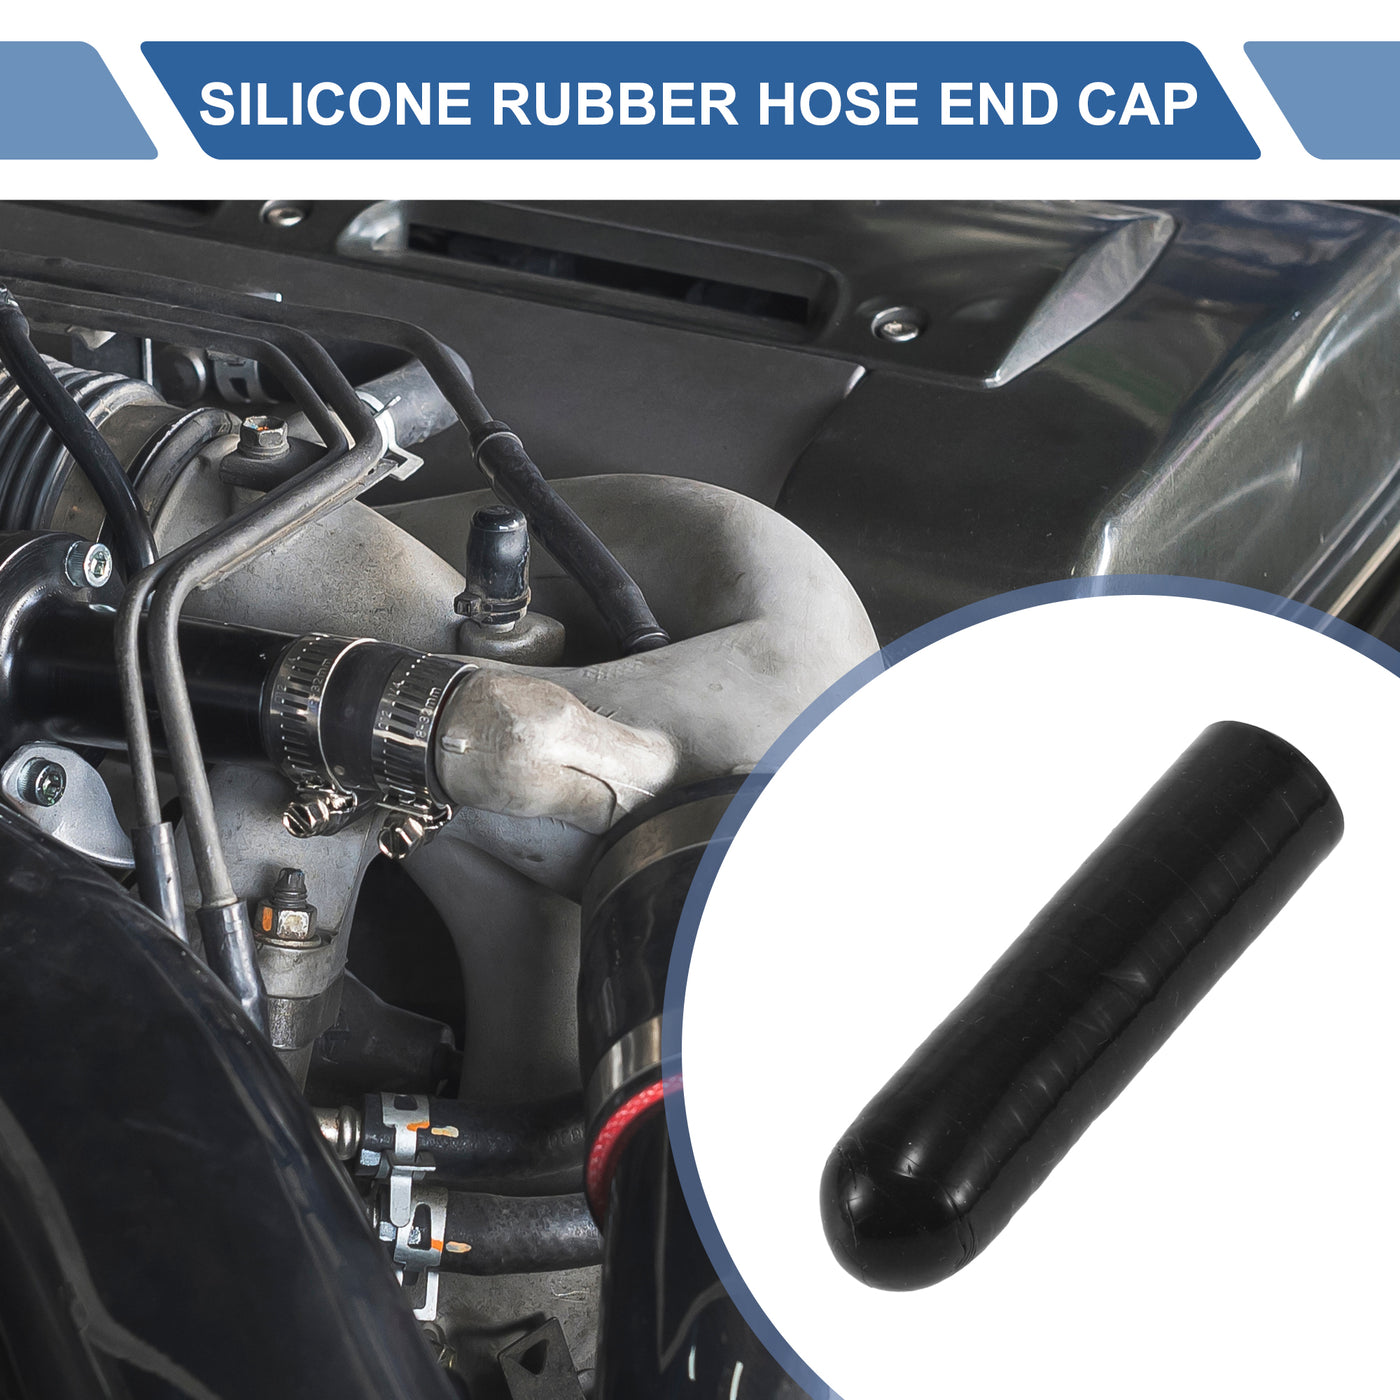 X AUTOHAUX 1 Pcs 60mm Length 10mm/0.39" ID Black Car Silicone Rubber Hose End Cap with Clamp Silicone Reinforced Blanking Cap for Bypass Tube Universal